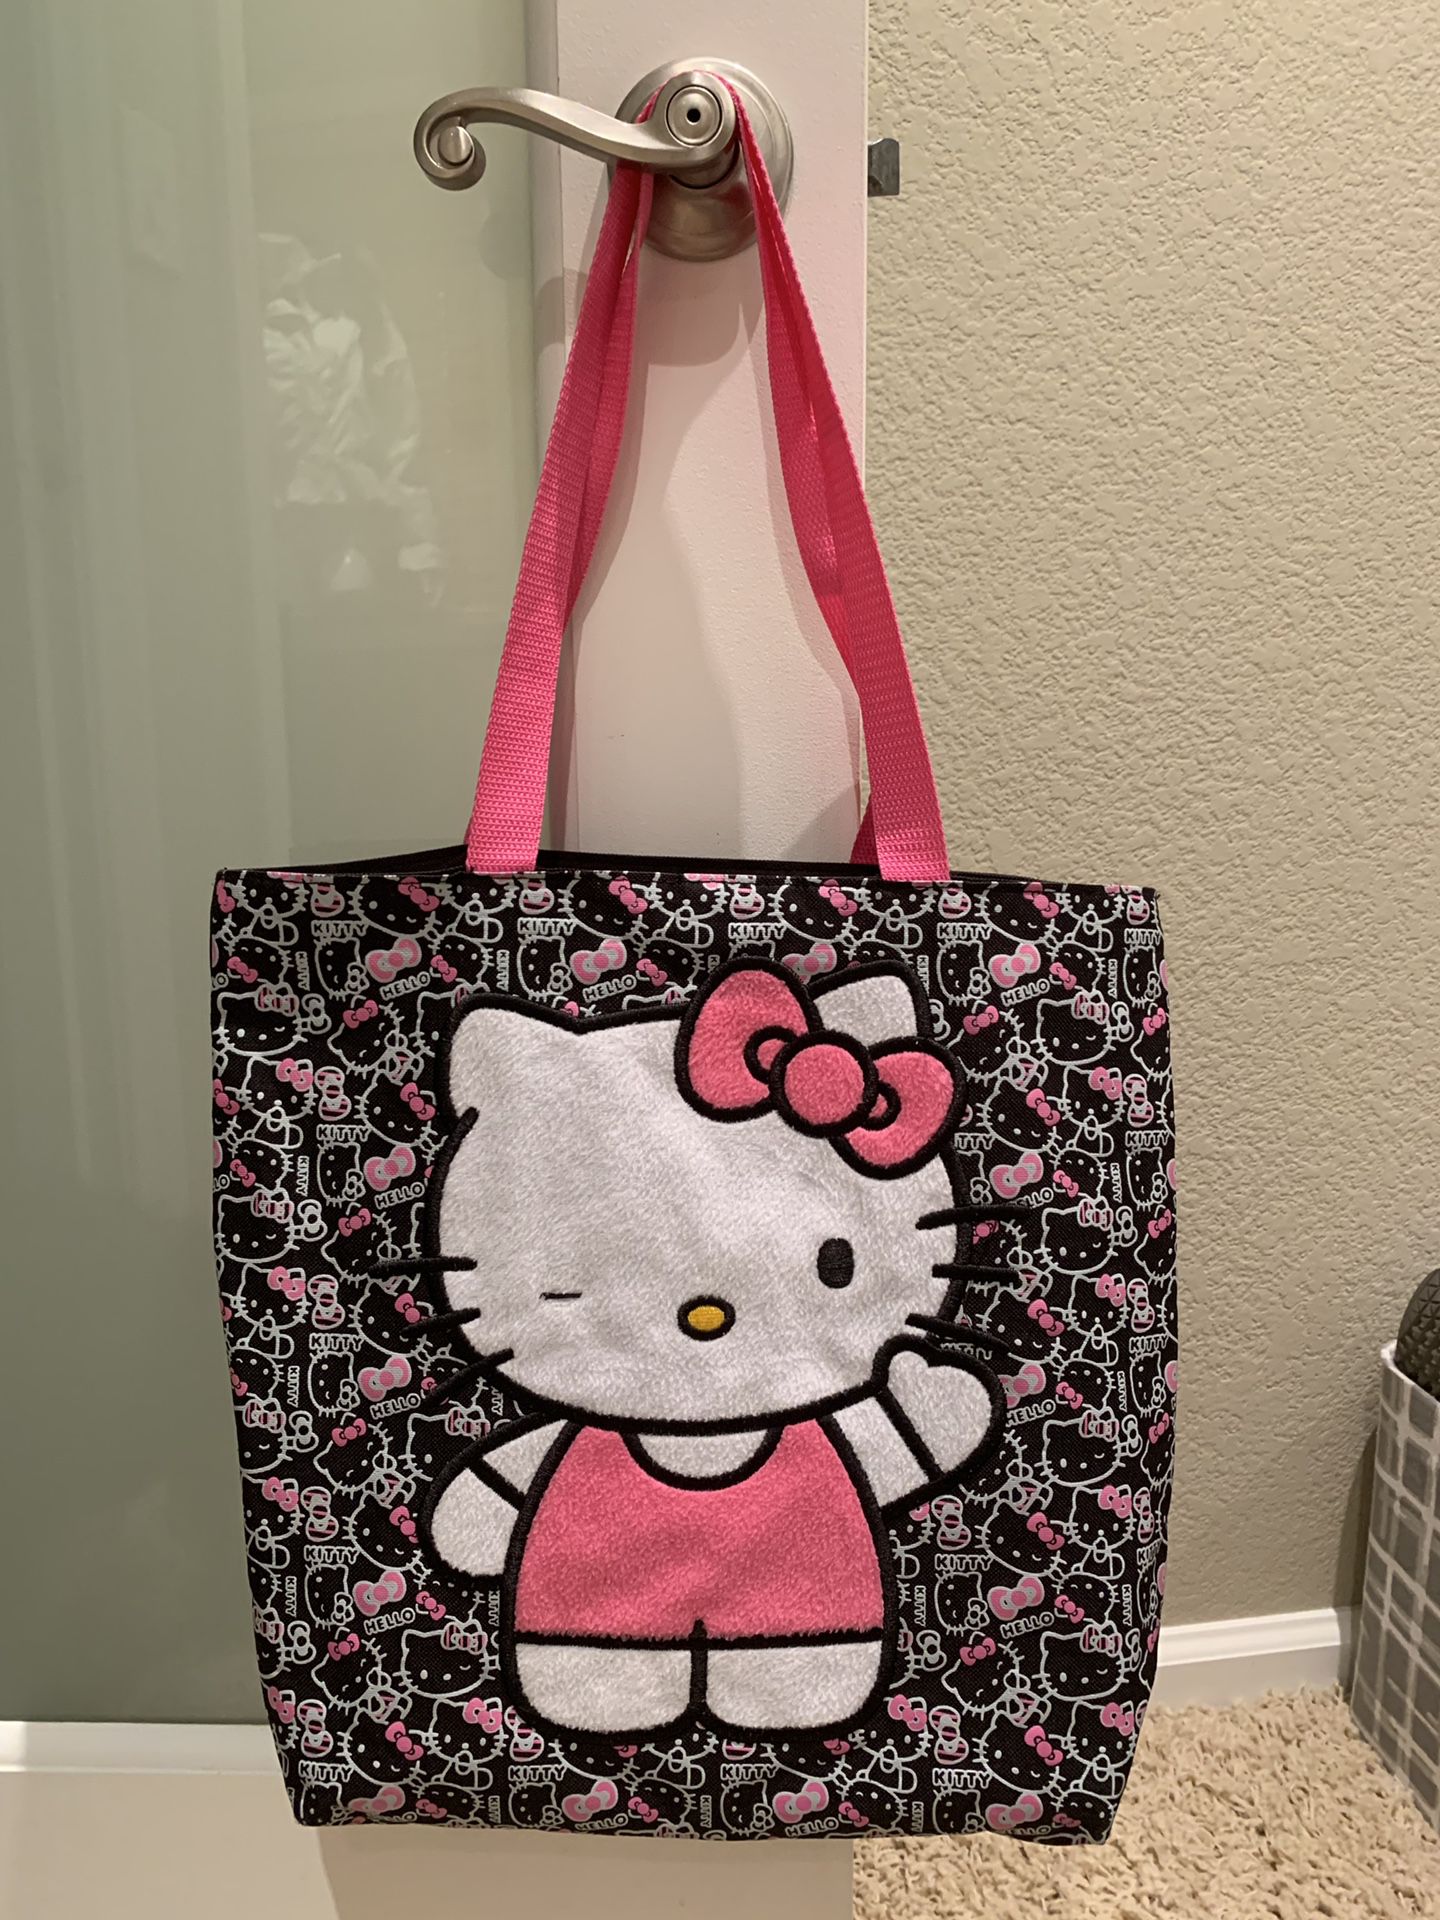 Hello Kitty tote purse bag in excellent condition